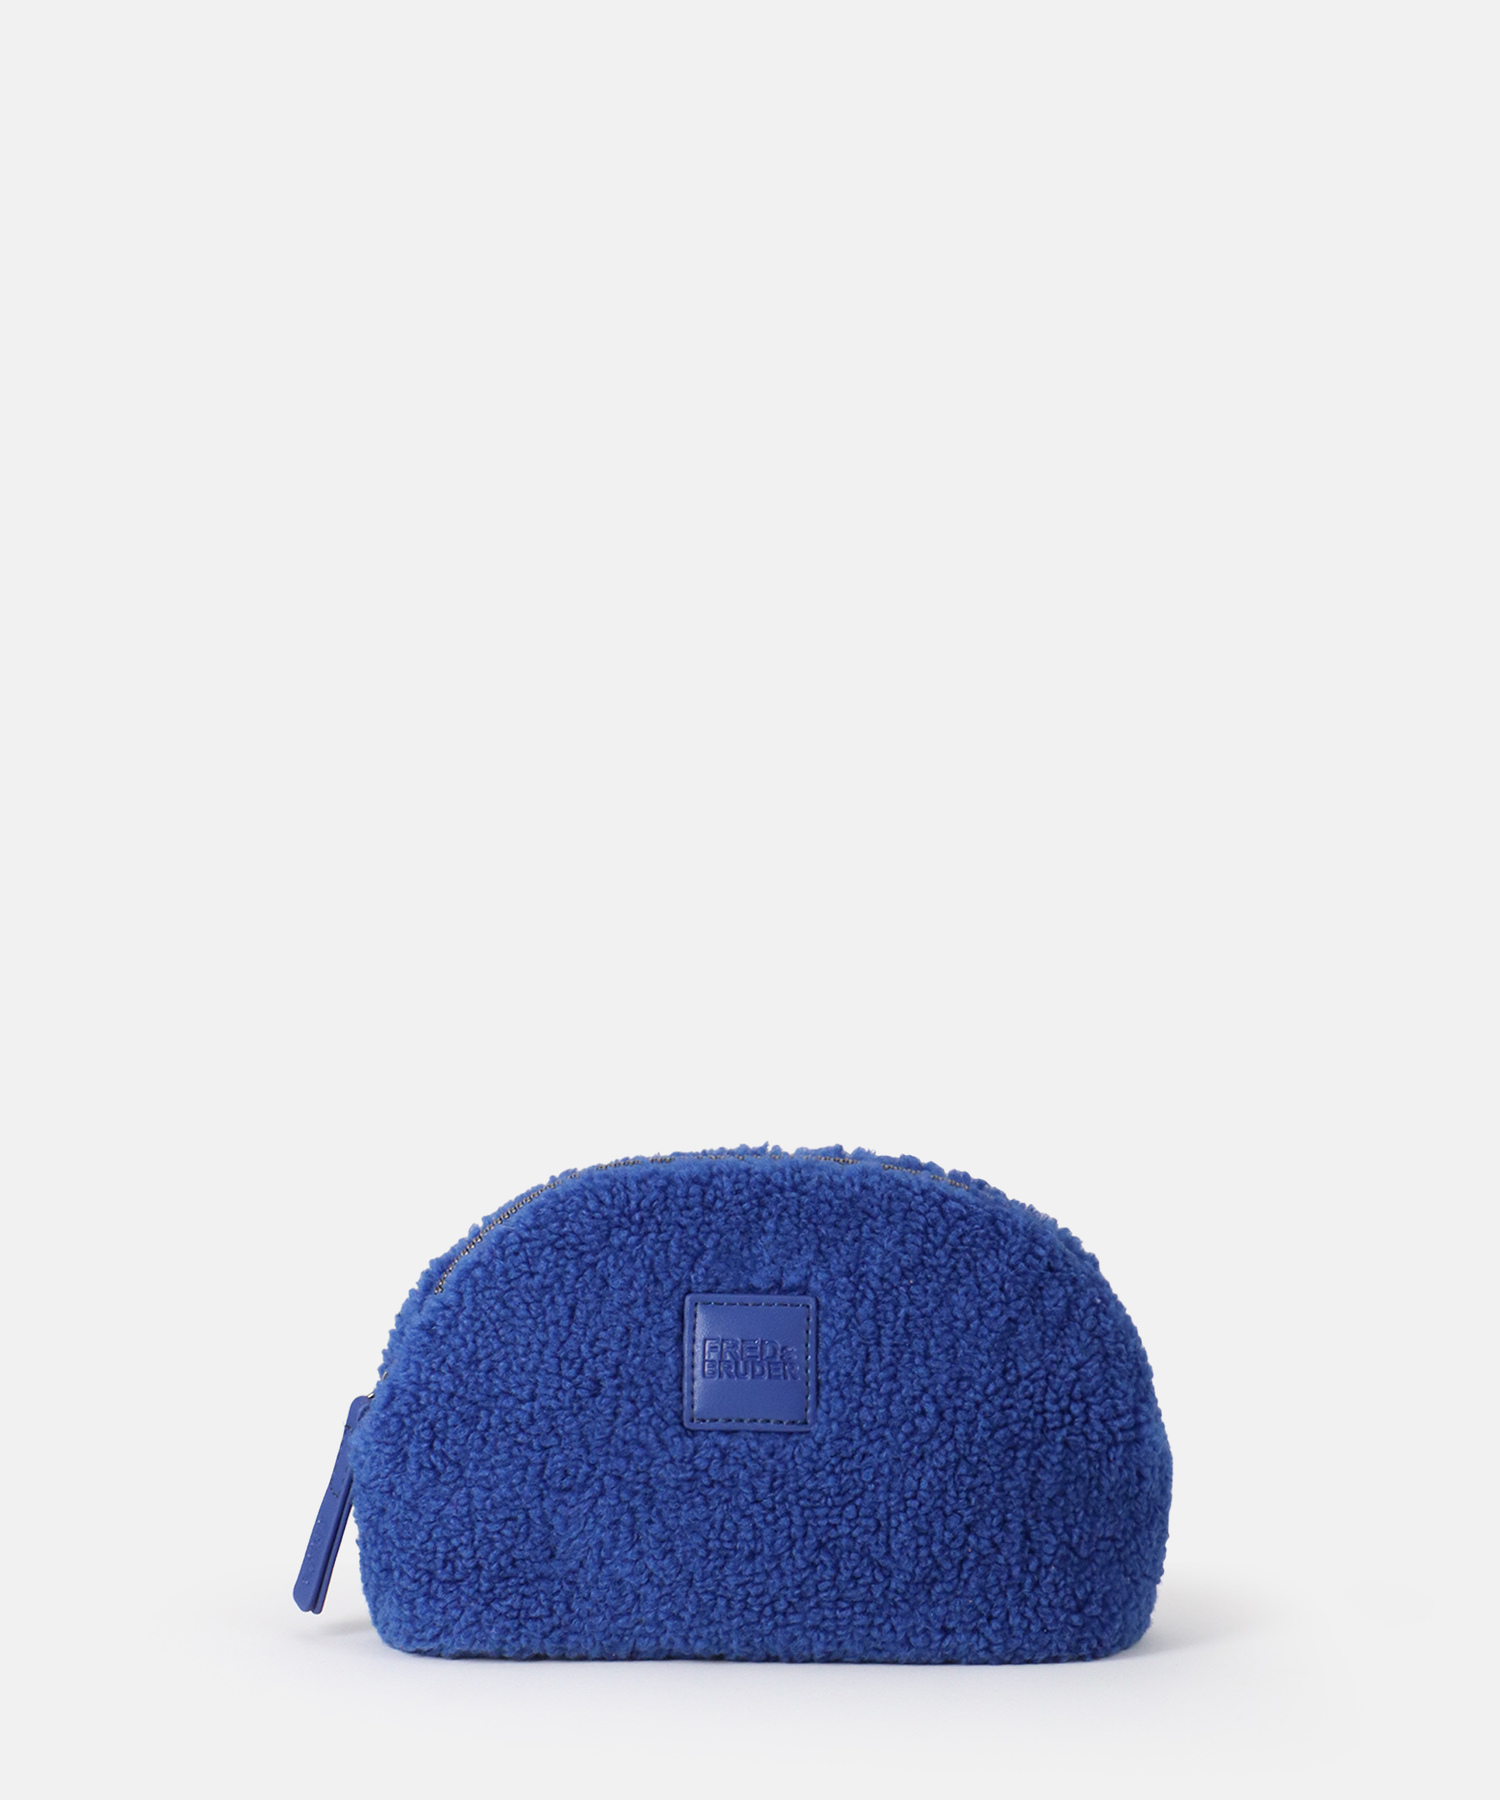 Rupol Small Pouch